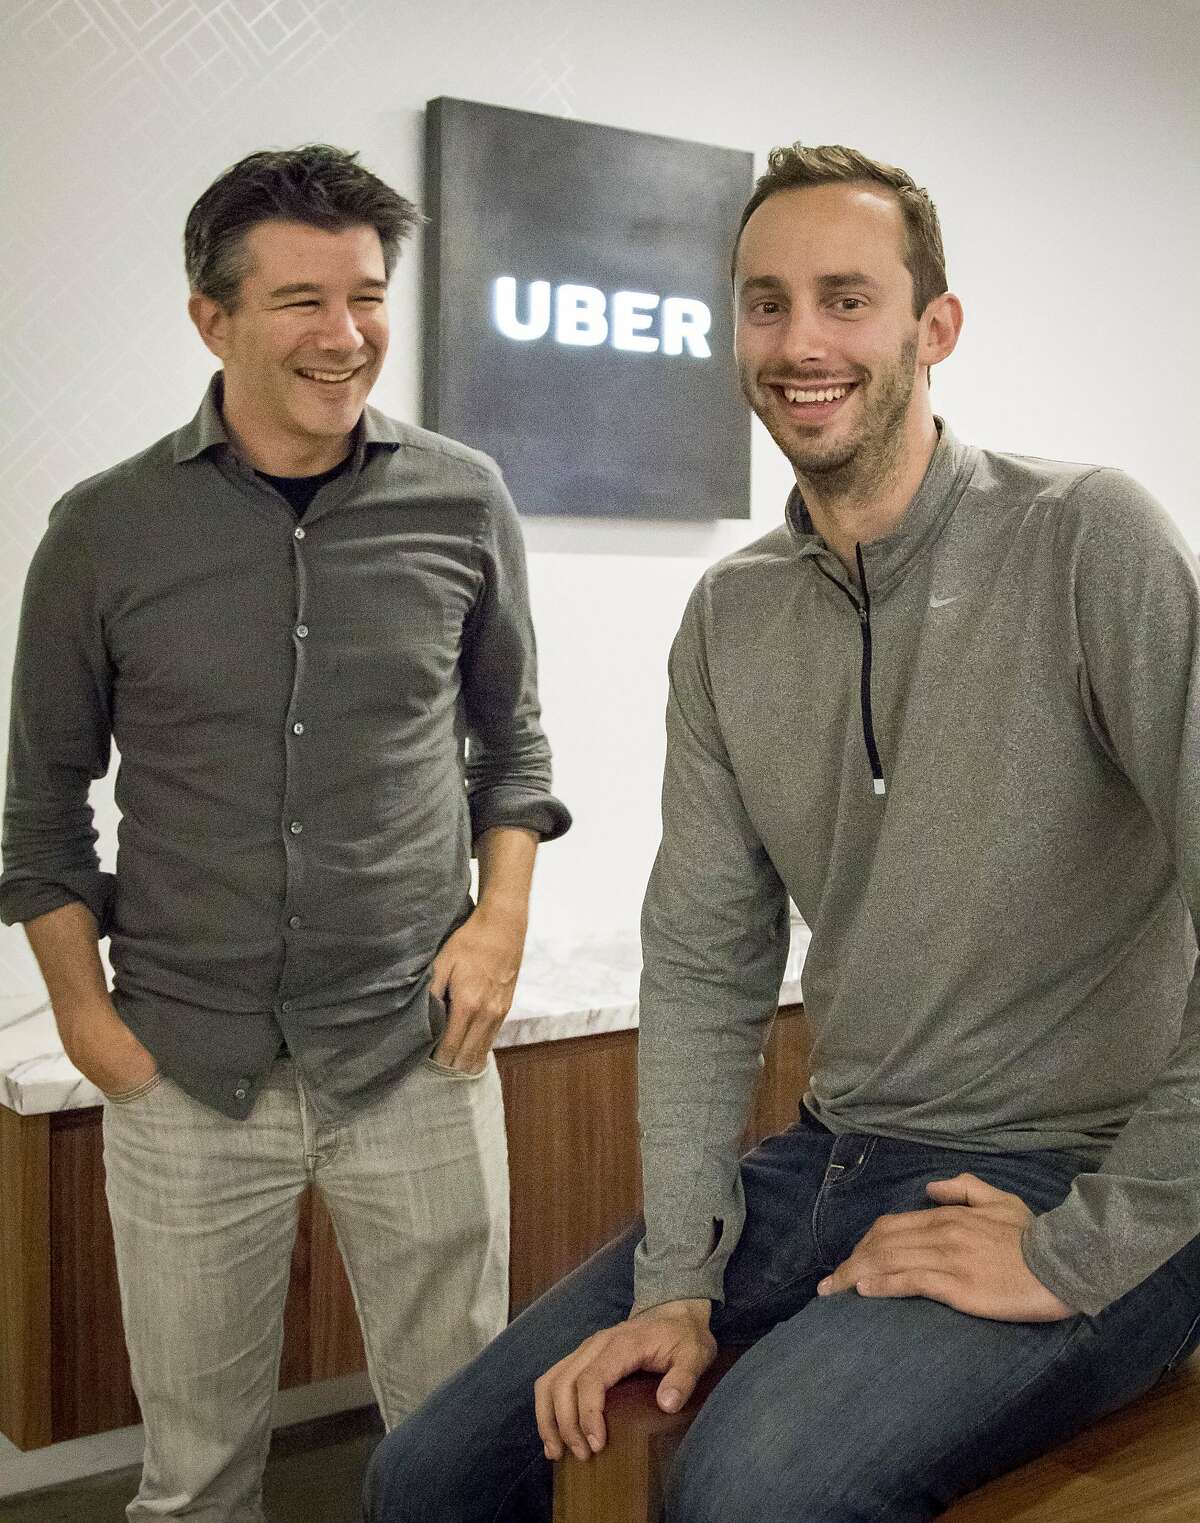 Uber CEO Travis Kalanick, left, and Anthony Levandowski, co-founder of Otto, pose for a photo in the lobby of Uber headquarters, Thursday, Aug. 18, 2016, in San Francisco.